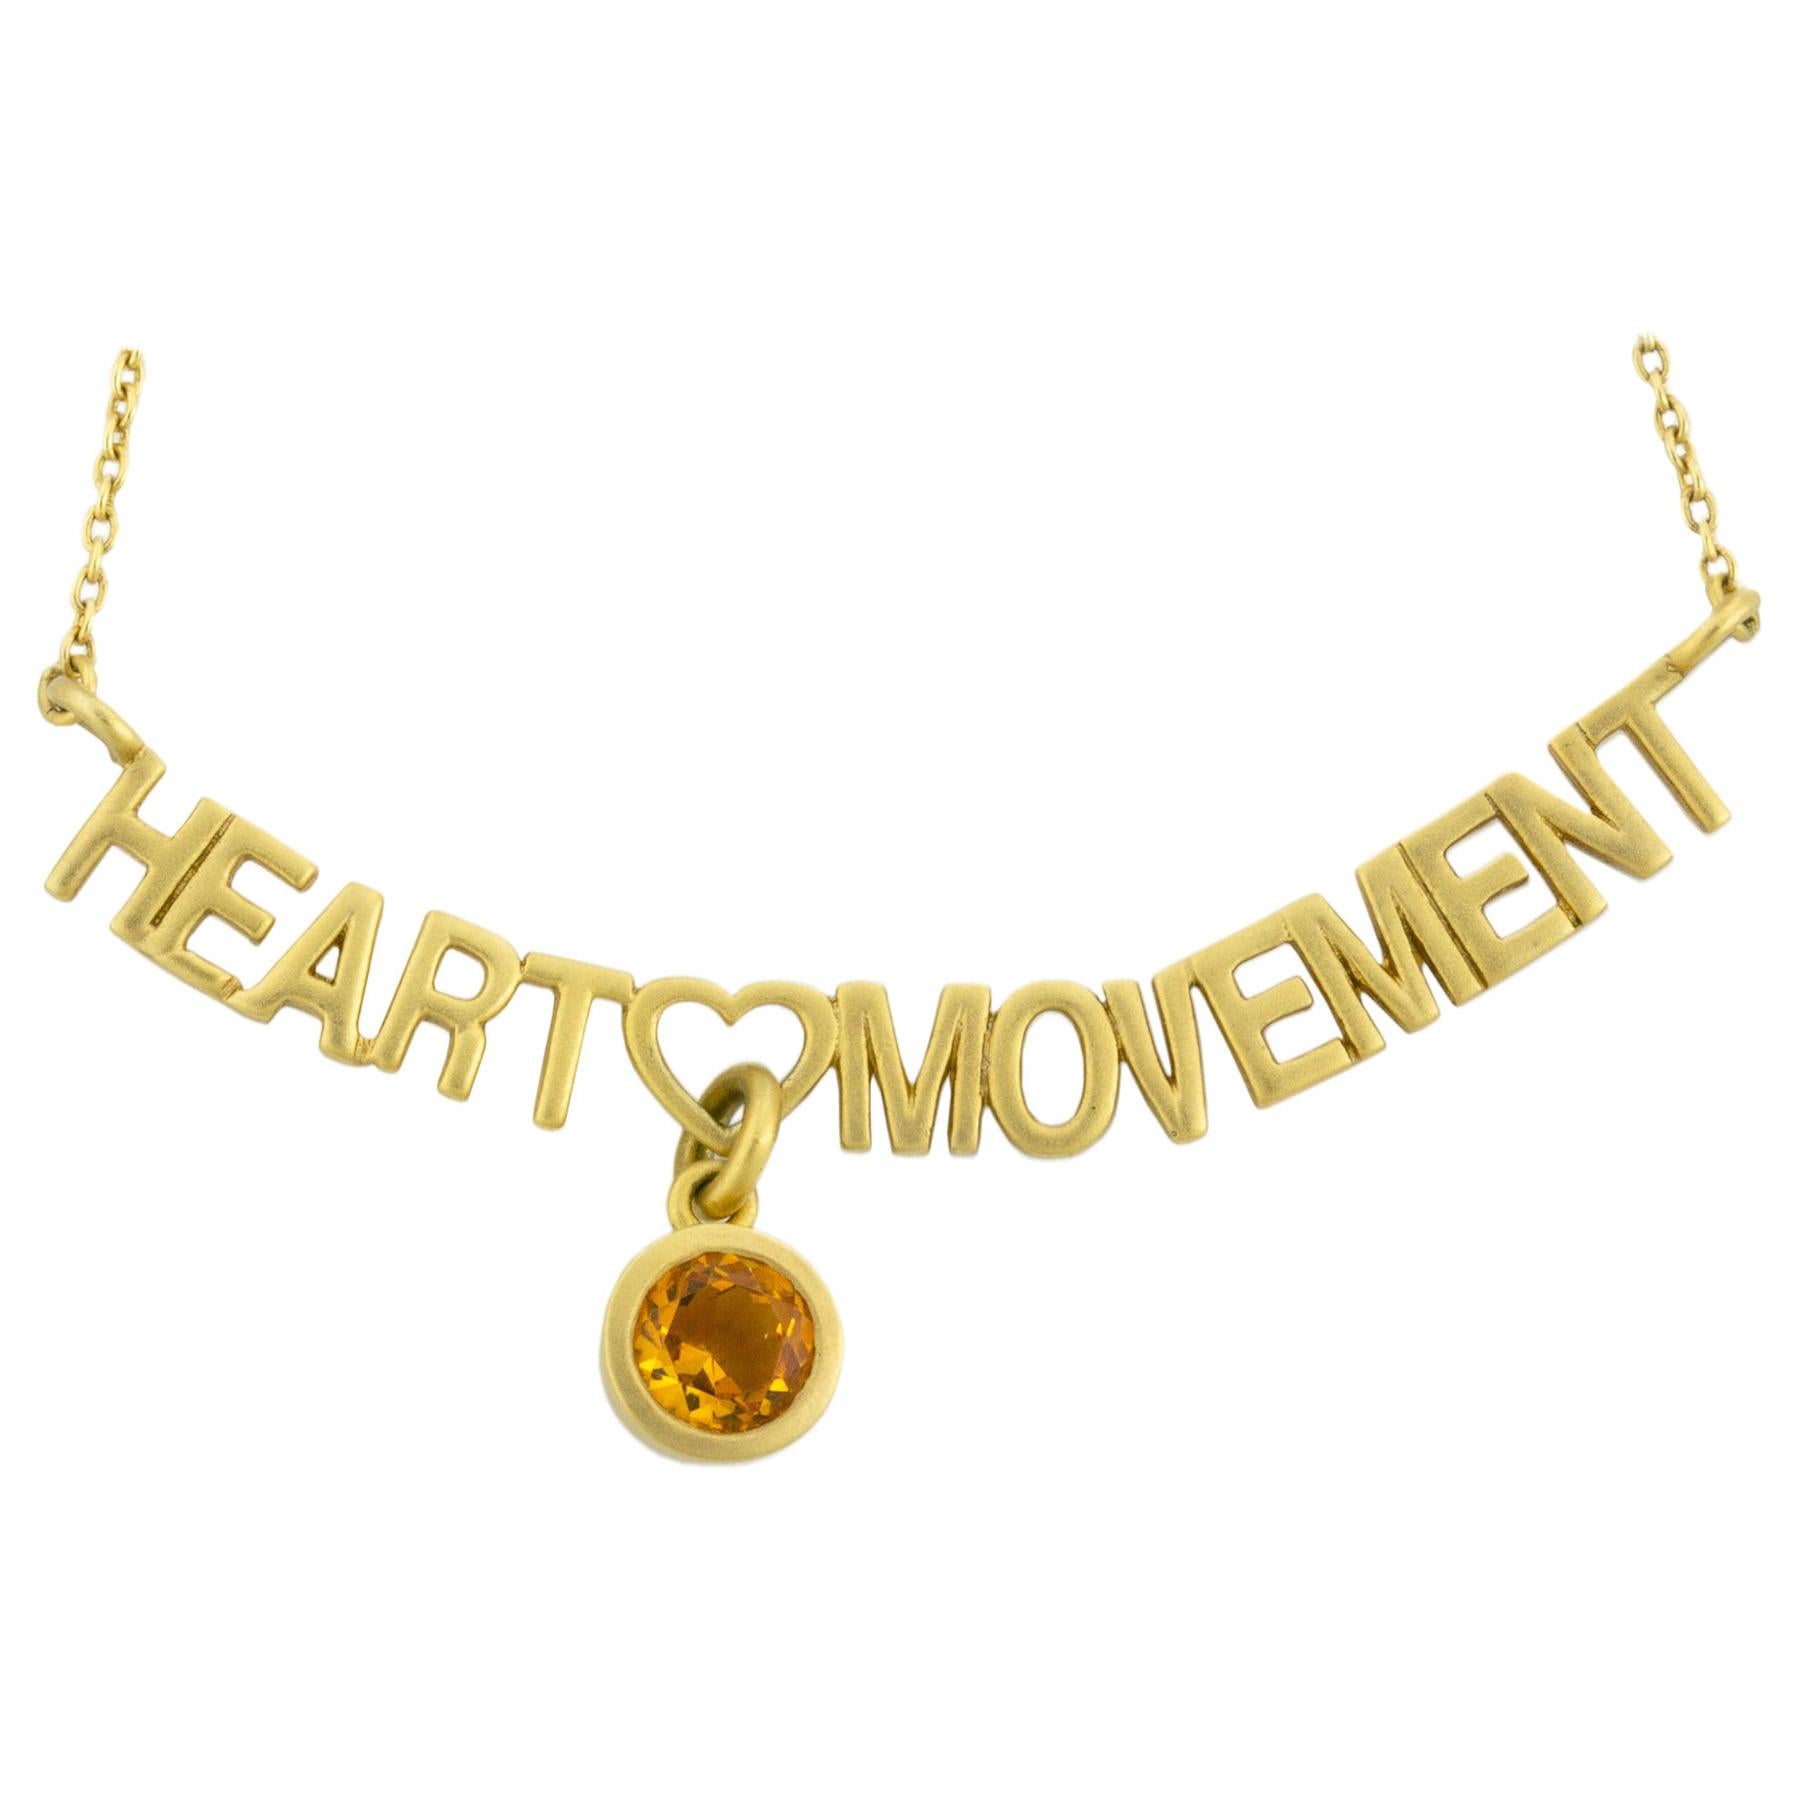 Heart Pendant Black Enamel Included Engraving Vermeil Silver Gilt 18k Gold over 925 Sterling Silver So Chic Jewels